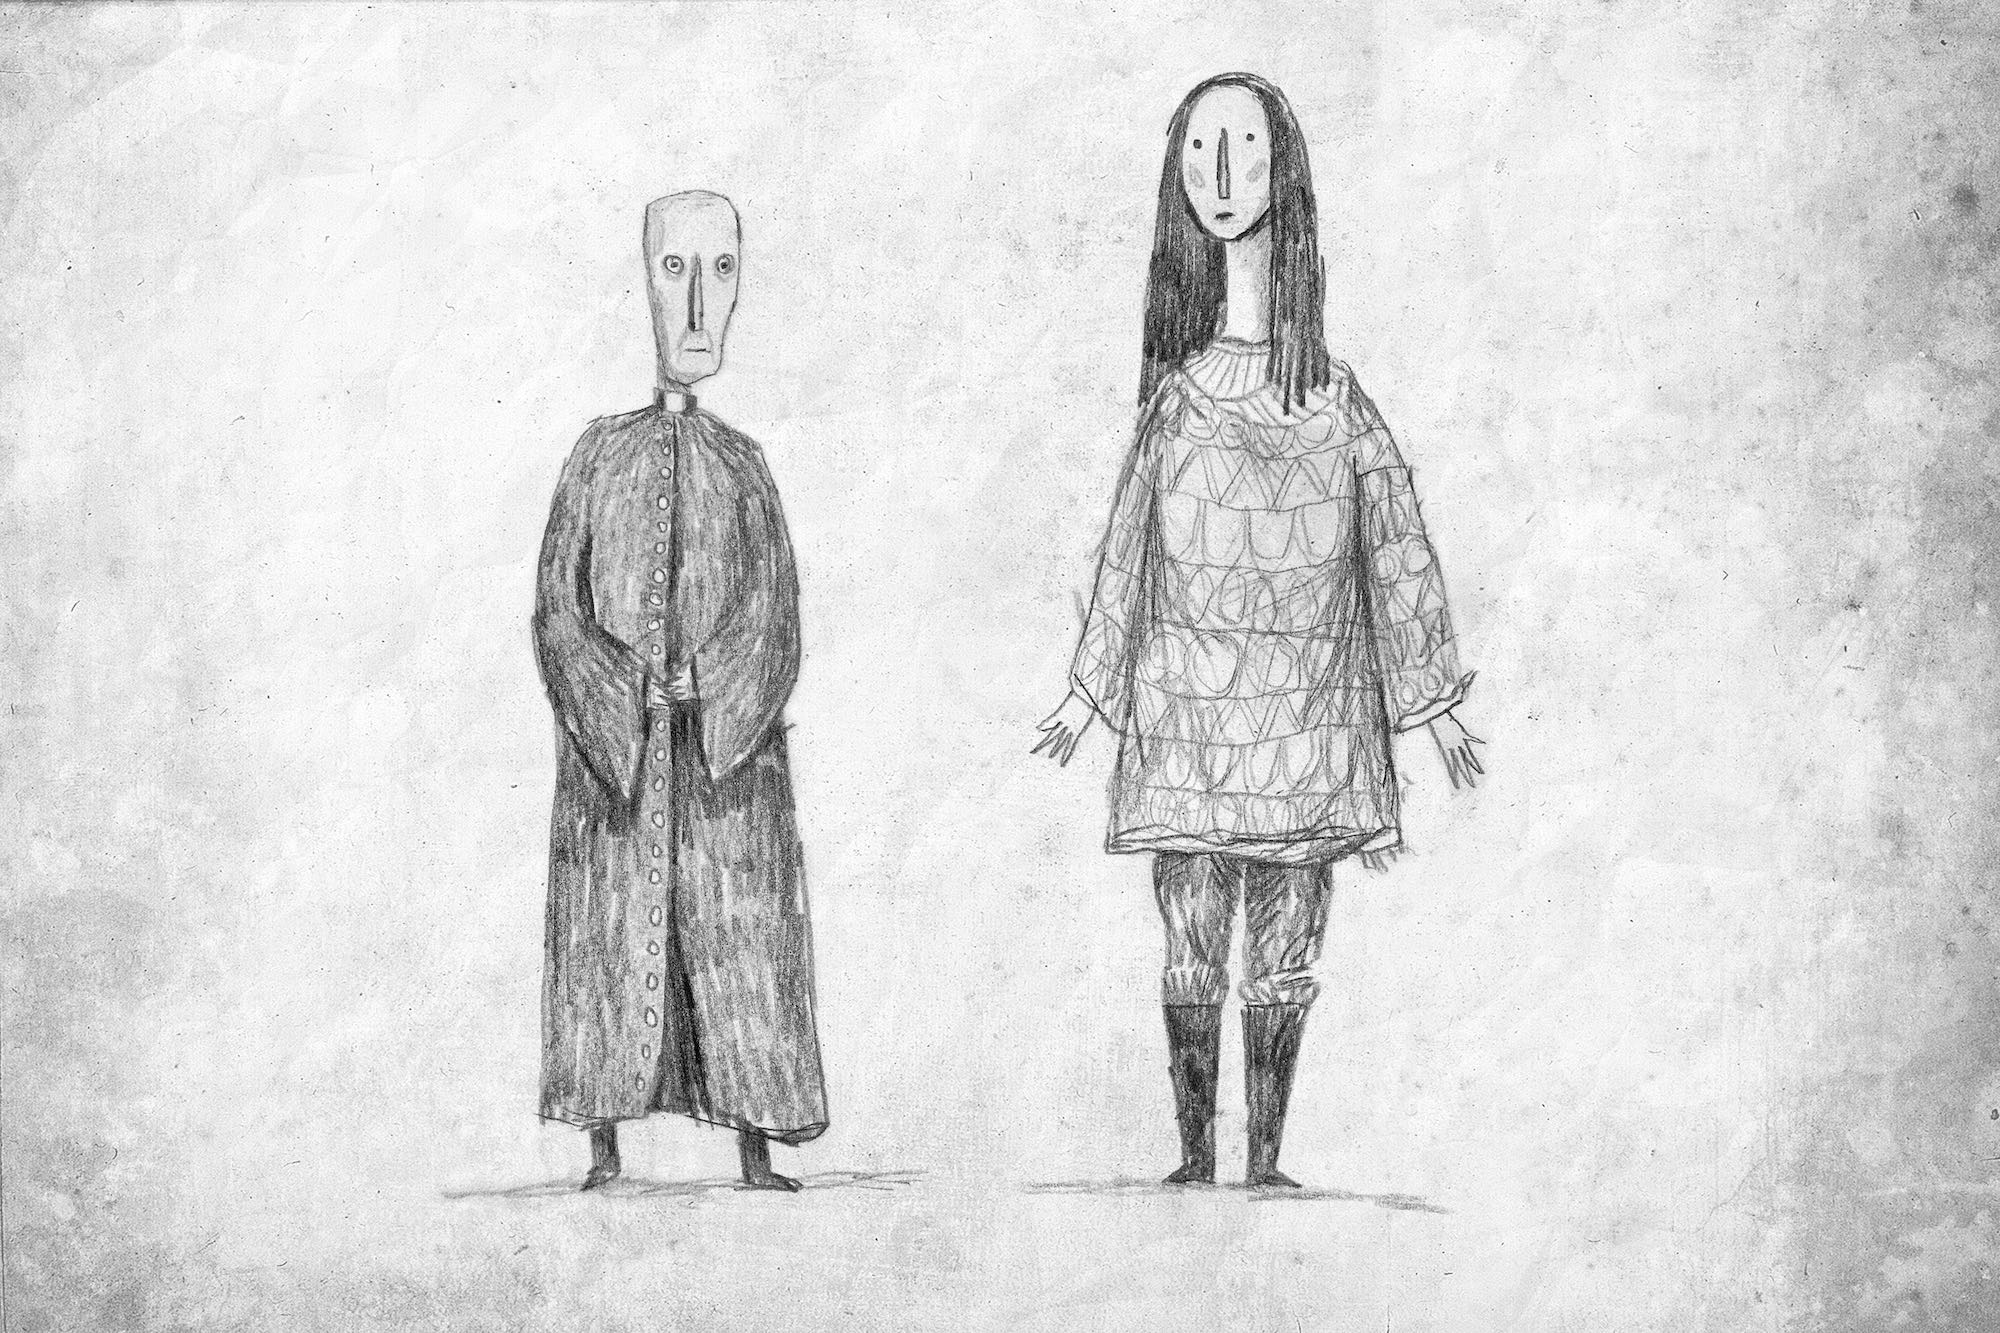 Original character sketches for the short film Salvation Has No Name